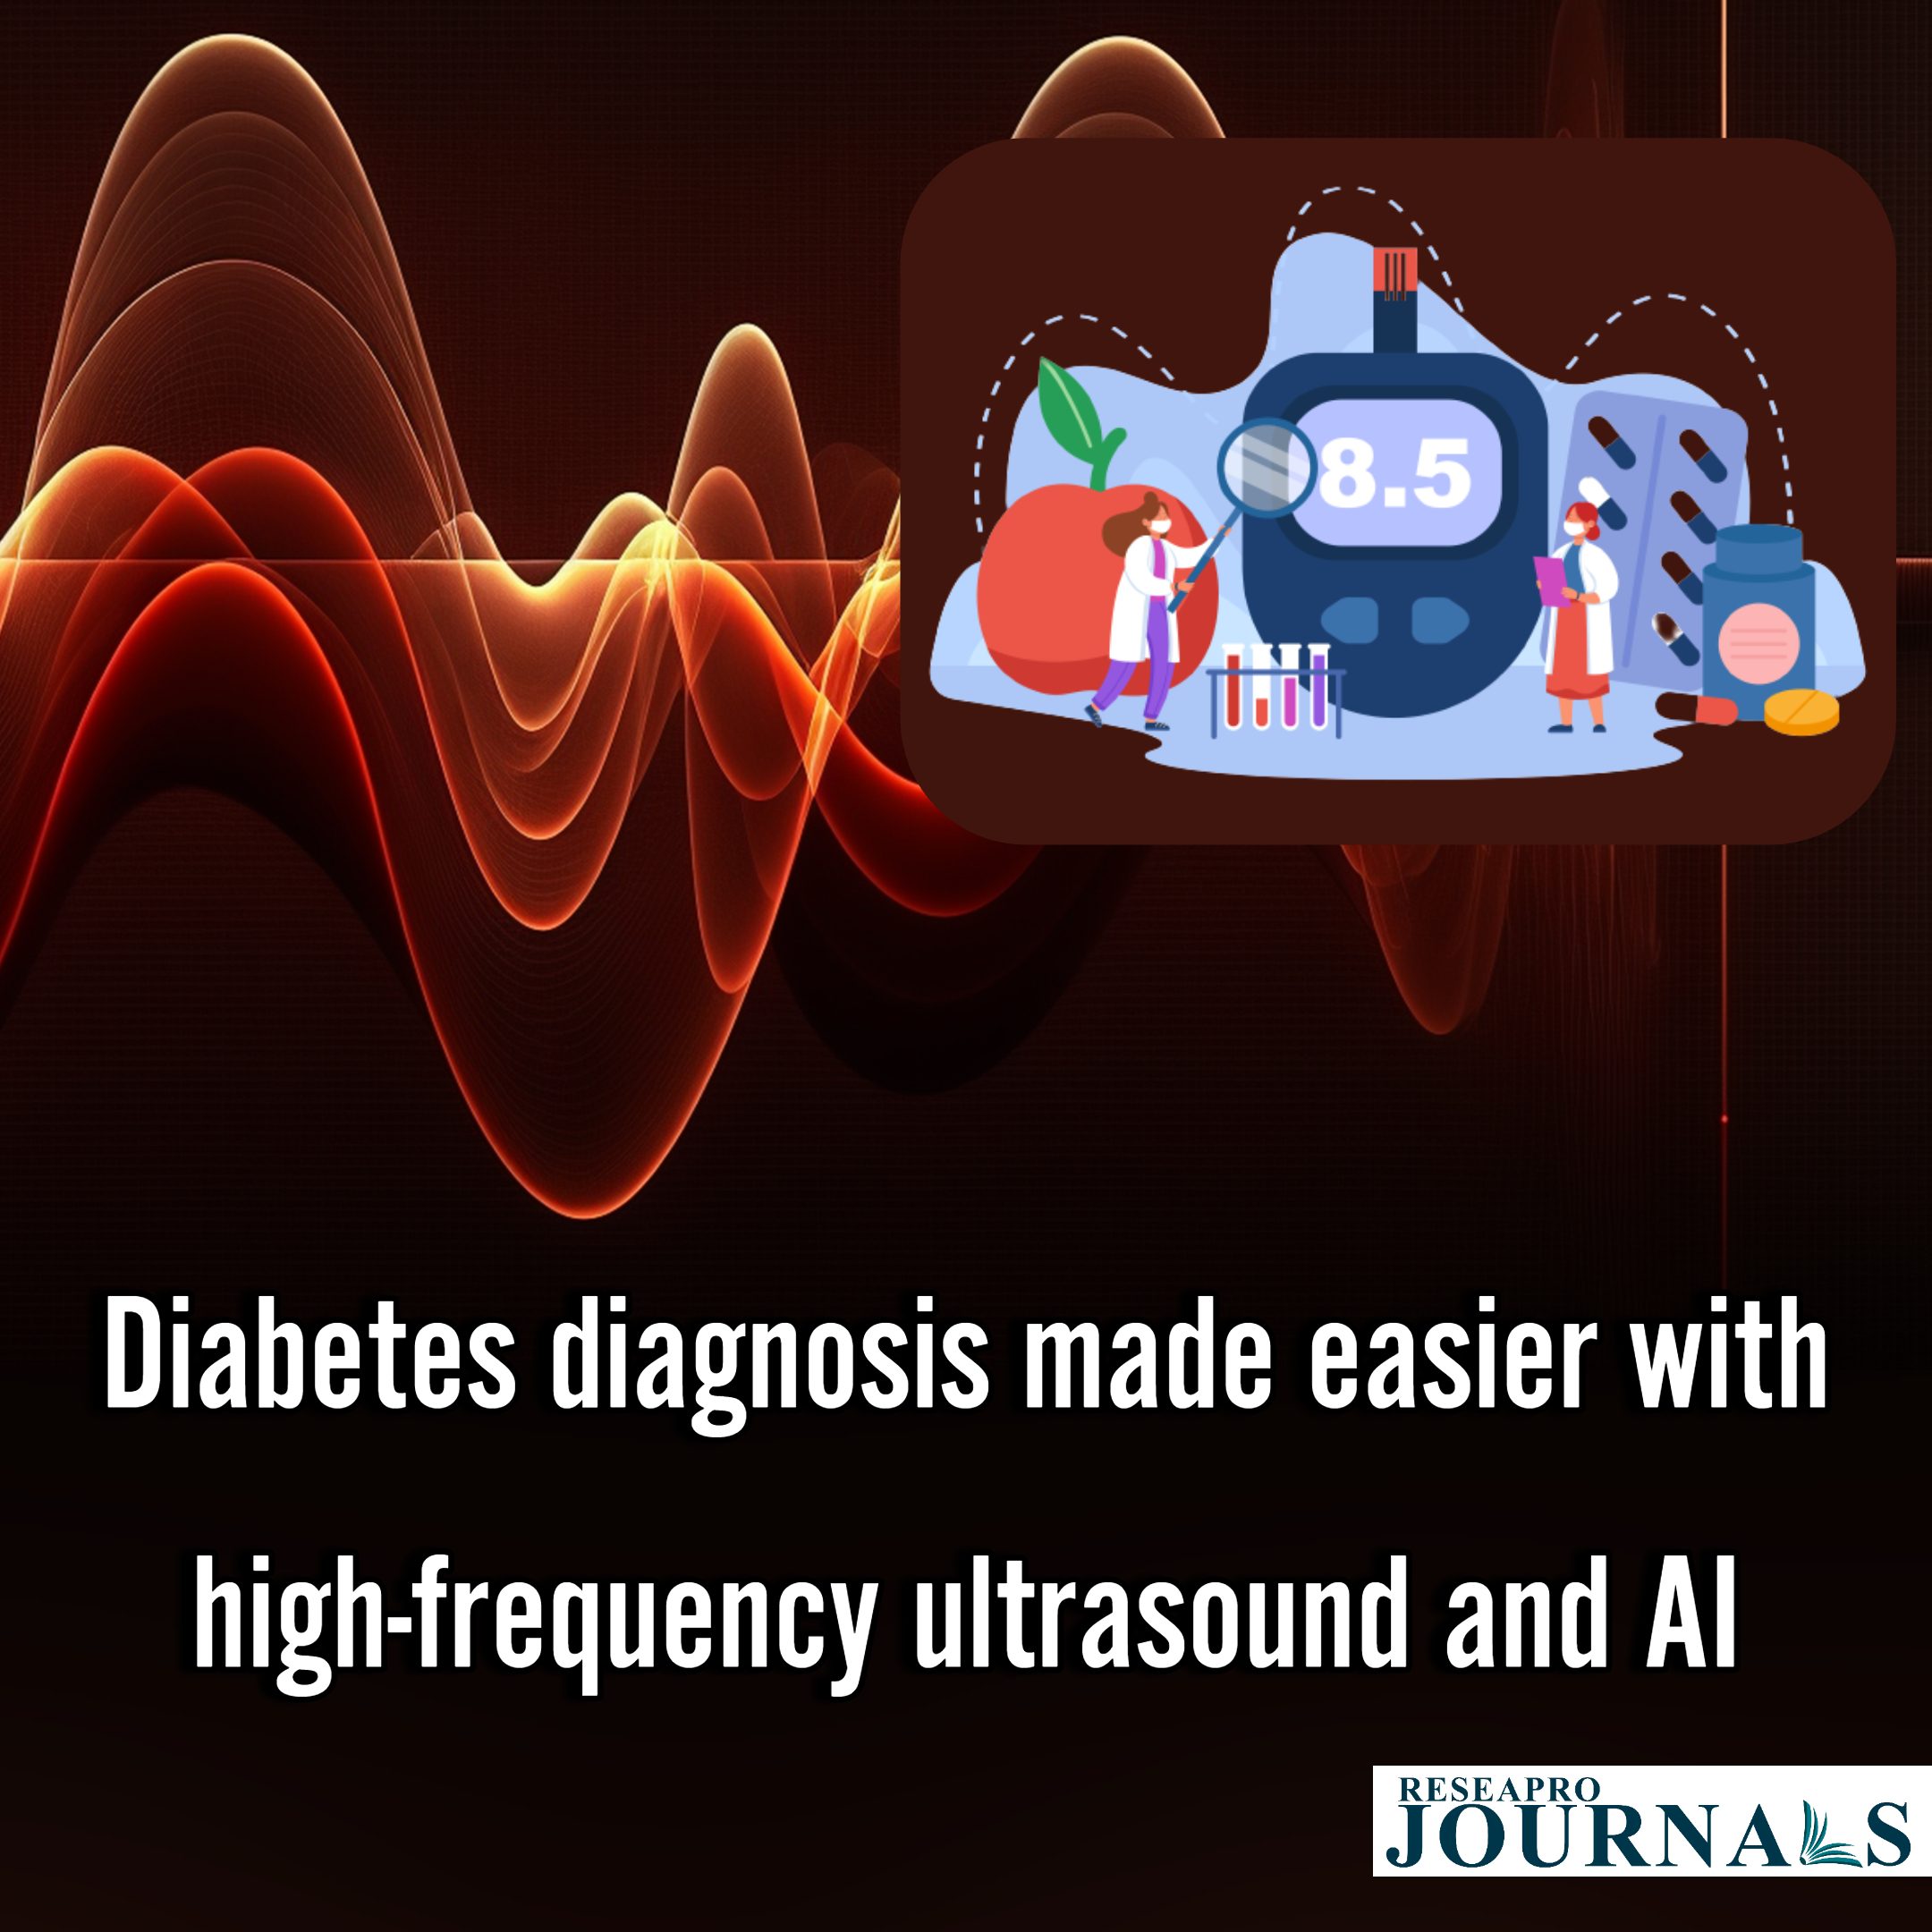 Diabetes diagnosis made easier with high-frequency ultrasound and AI